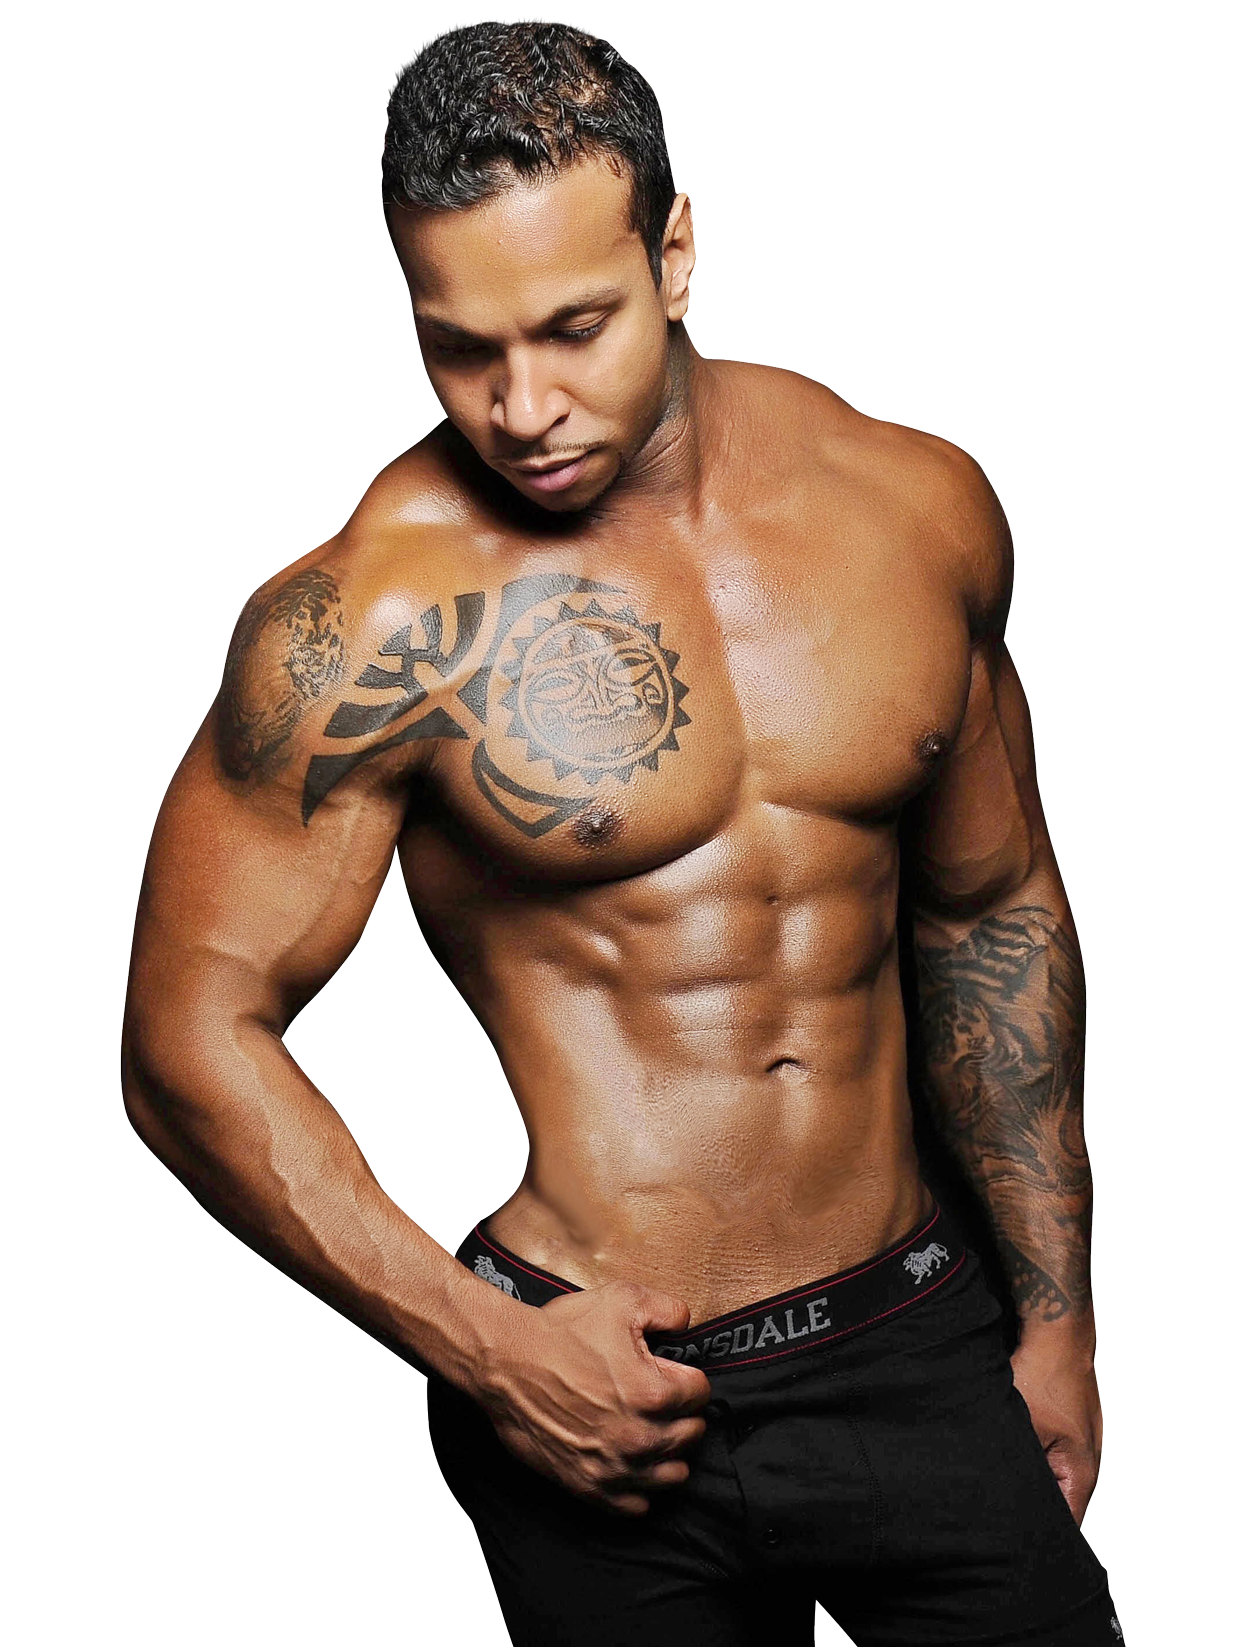 Body Man Abs Fitness Download Free Image PNG Image